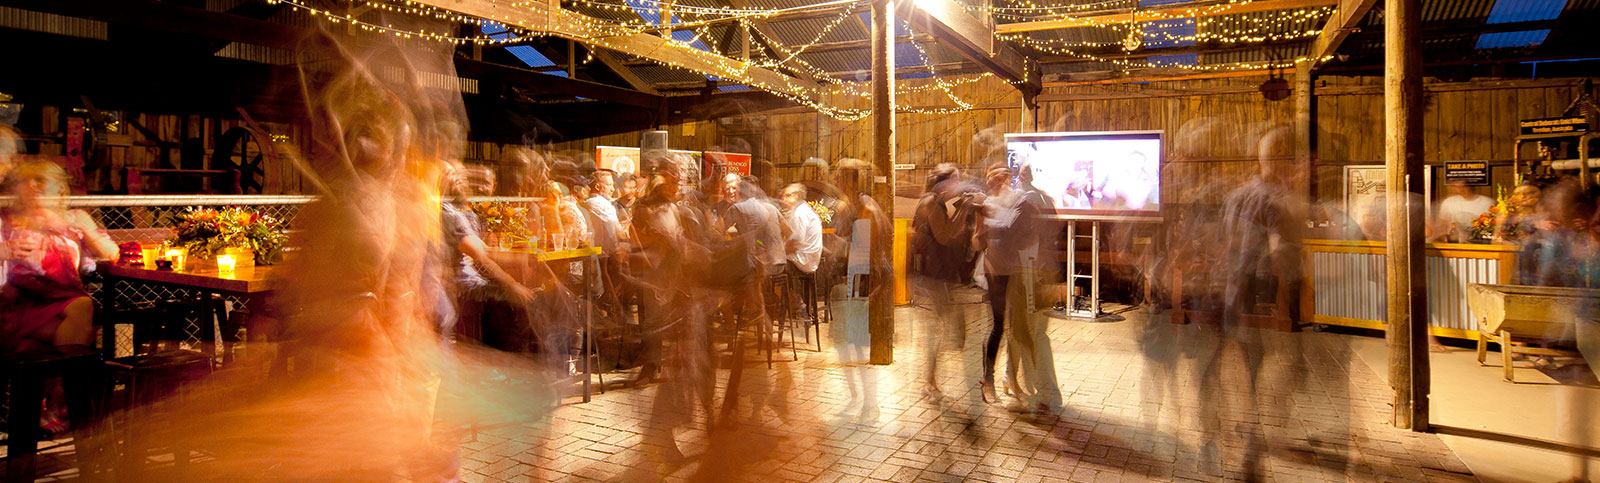 People dancing in The Panning Shed